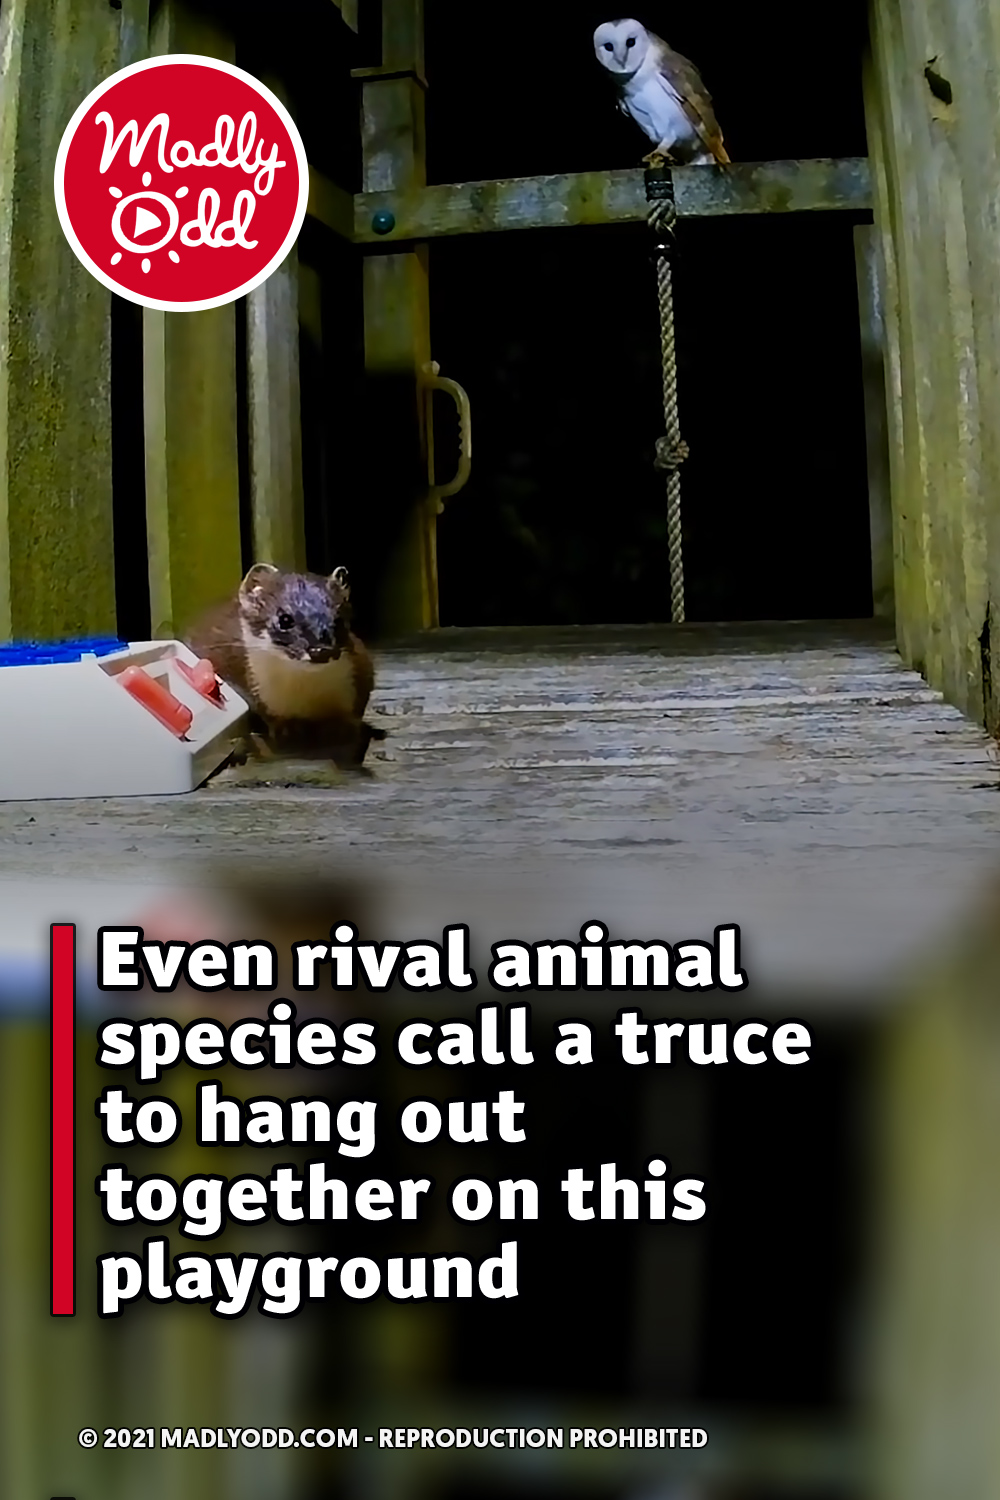 Even rival animal species call a truce to hang out together on this playground